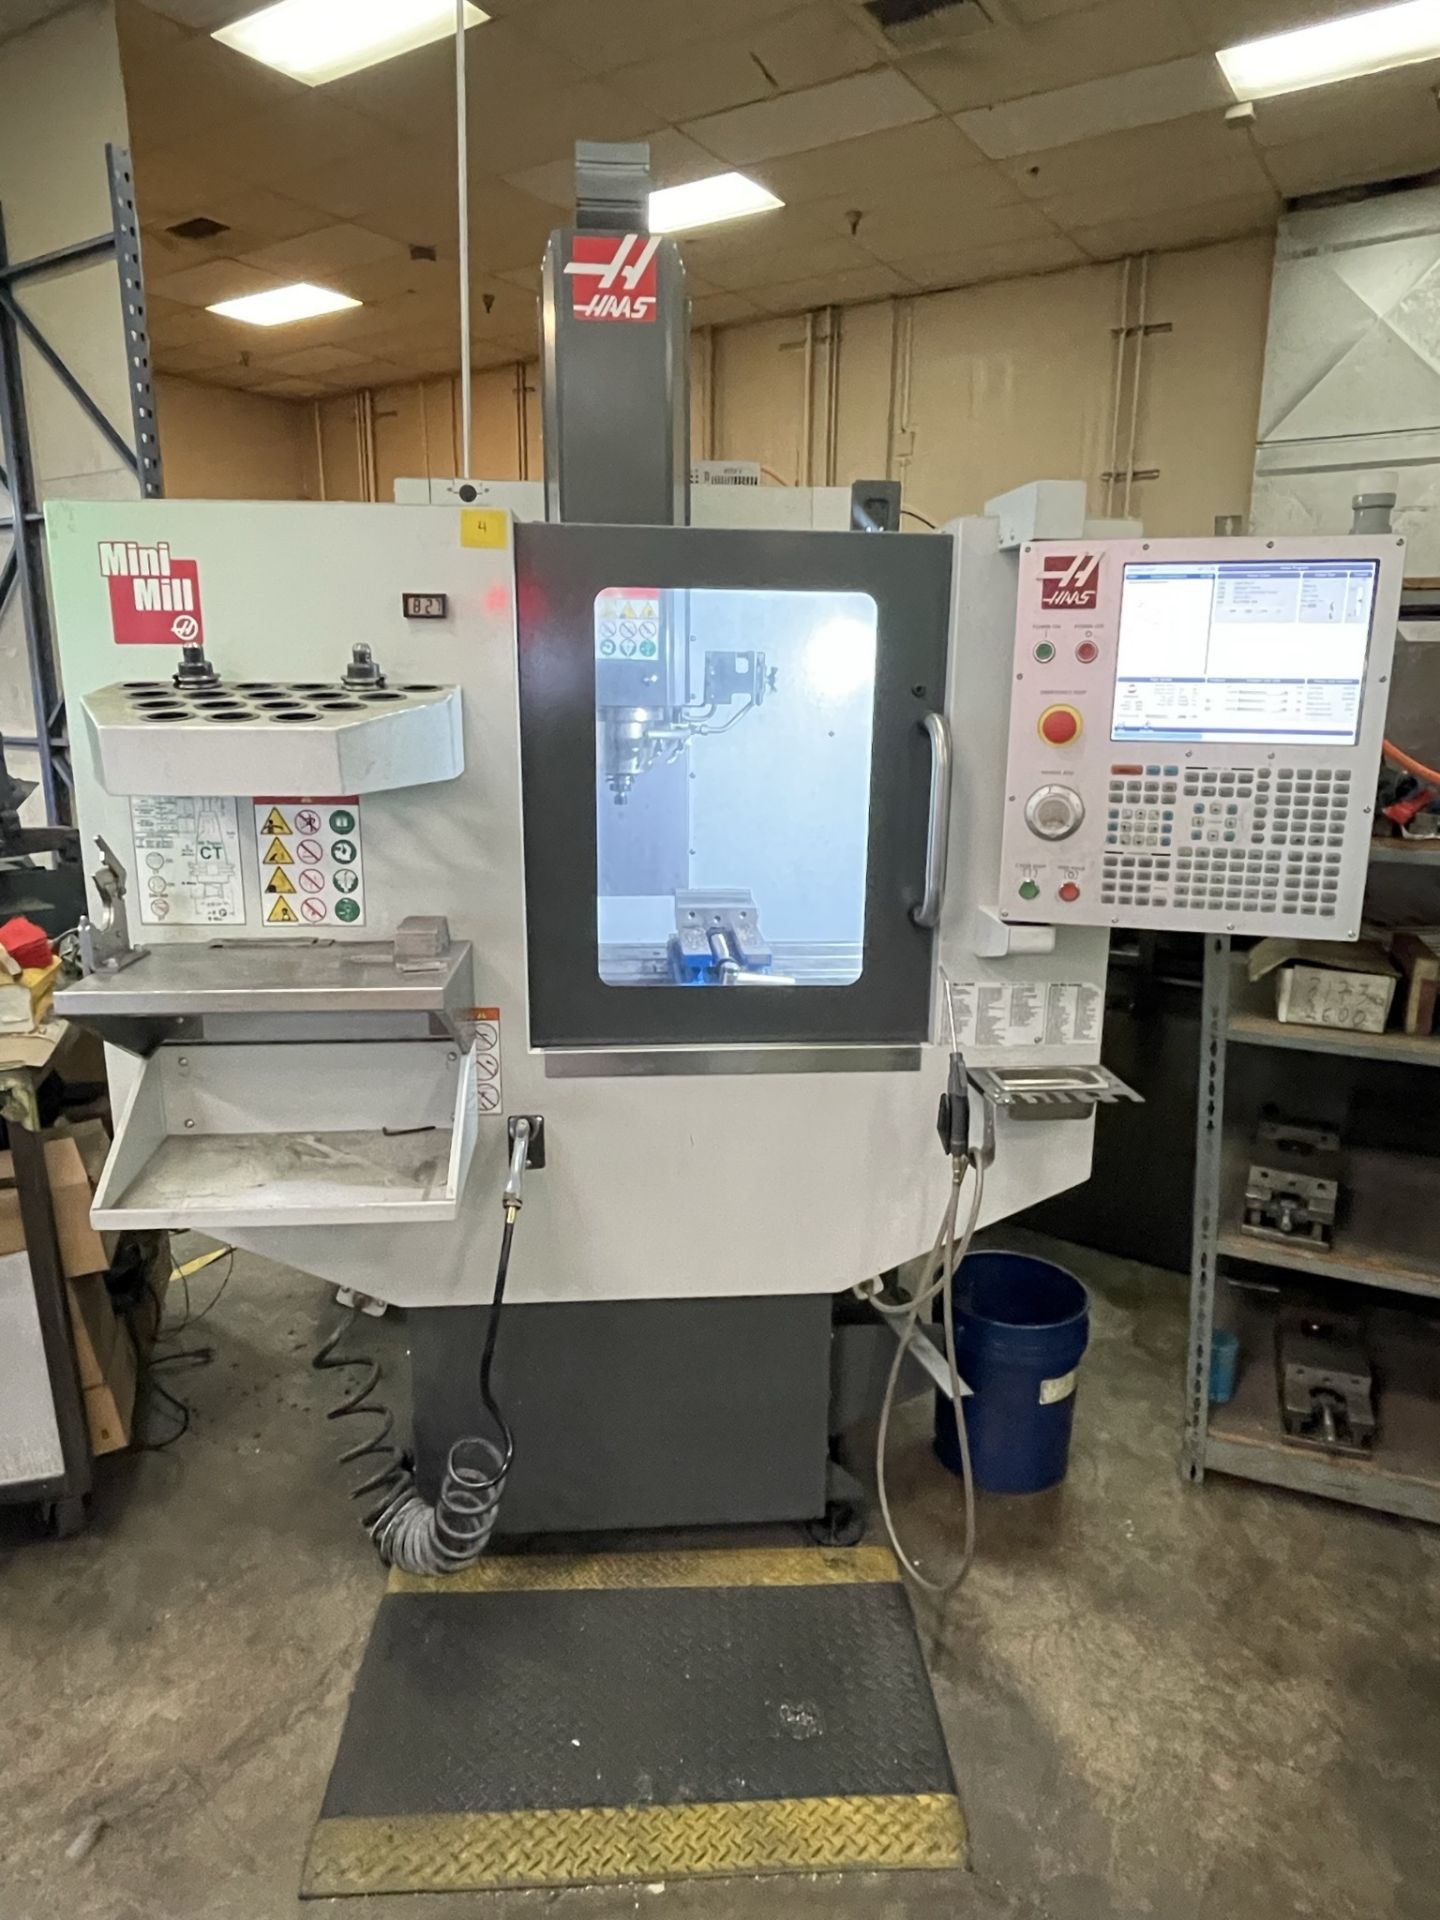 HAAS Mini Mill CNC Vertical Machining Center, Late Model, Low Hours, New 2019 *Off-Site*